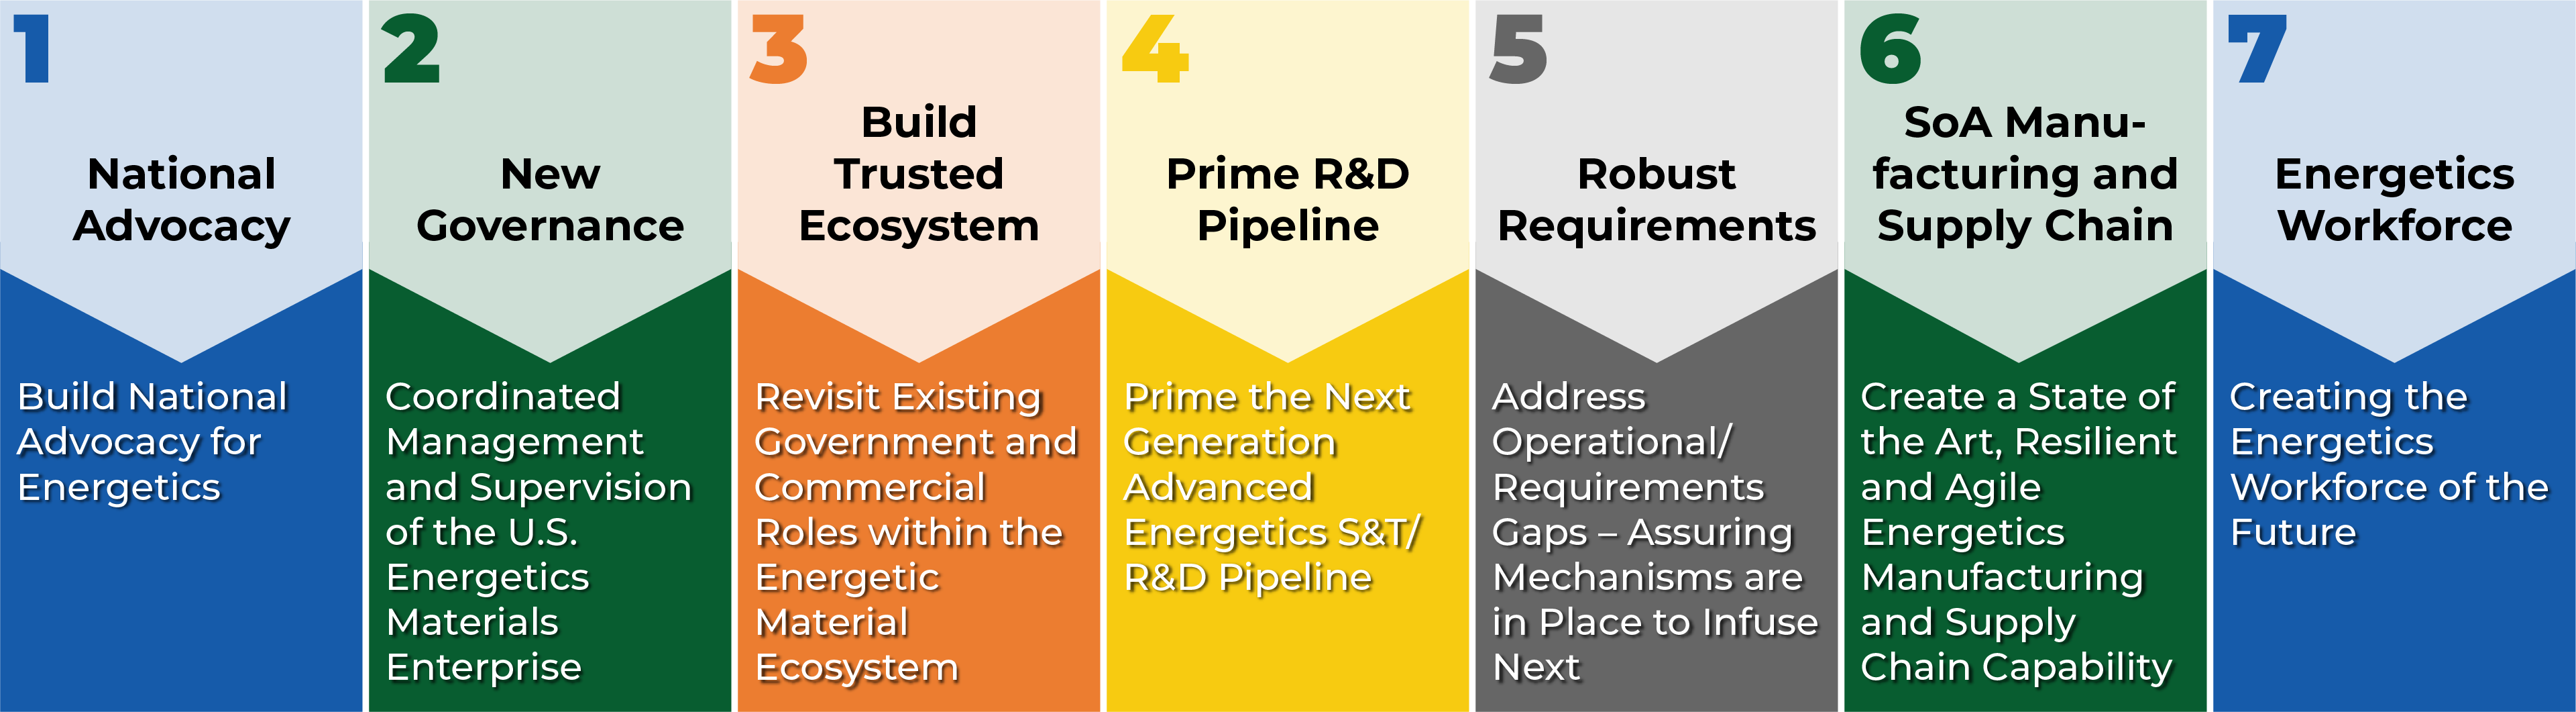 Graphic shows 7 boxes each with a title and subtitle. Box 1: National Advocacy: Build National Advocacy for Energetics. Box 2: New Governance: Coordinated Management and Supervision of the U.S. Energetics Materials Enterprise. Box 3: Build Trusted Ecosystem: Revisit existing government and commercial roles within the Energetic Material Ecosystem. Box 4: Prime R&D Pipeline: Prime the Next Generation Advanced Energetics S&T/R&D Pipeline. Box 5: Robust Requirements: Address Operational/Requirements Gaps - Assuring Mechanisms are in place. Box 6: SoA Manufacturing and Supply Chain: Create a State of the Art, Resilient and Agile Energetics Manufacturing and Supply Chain Capability. Box 7: Energetics Workforce: Creating the Energetics Workforce of the Future.